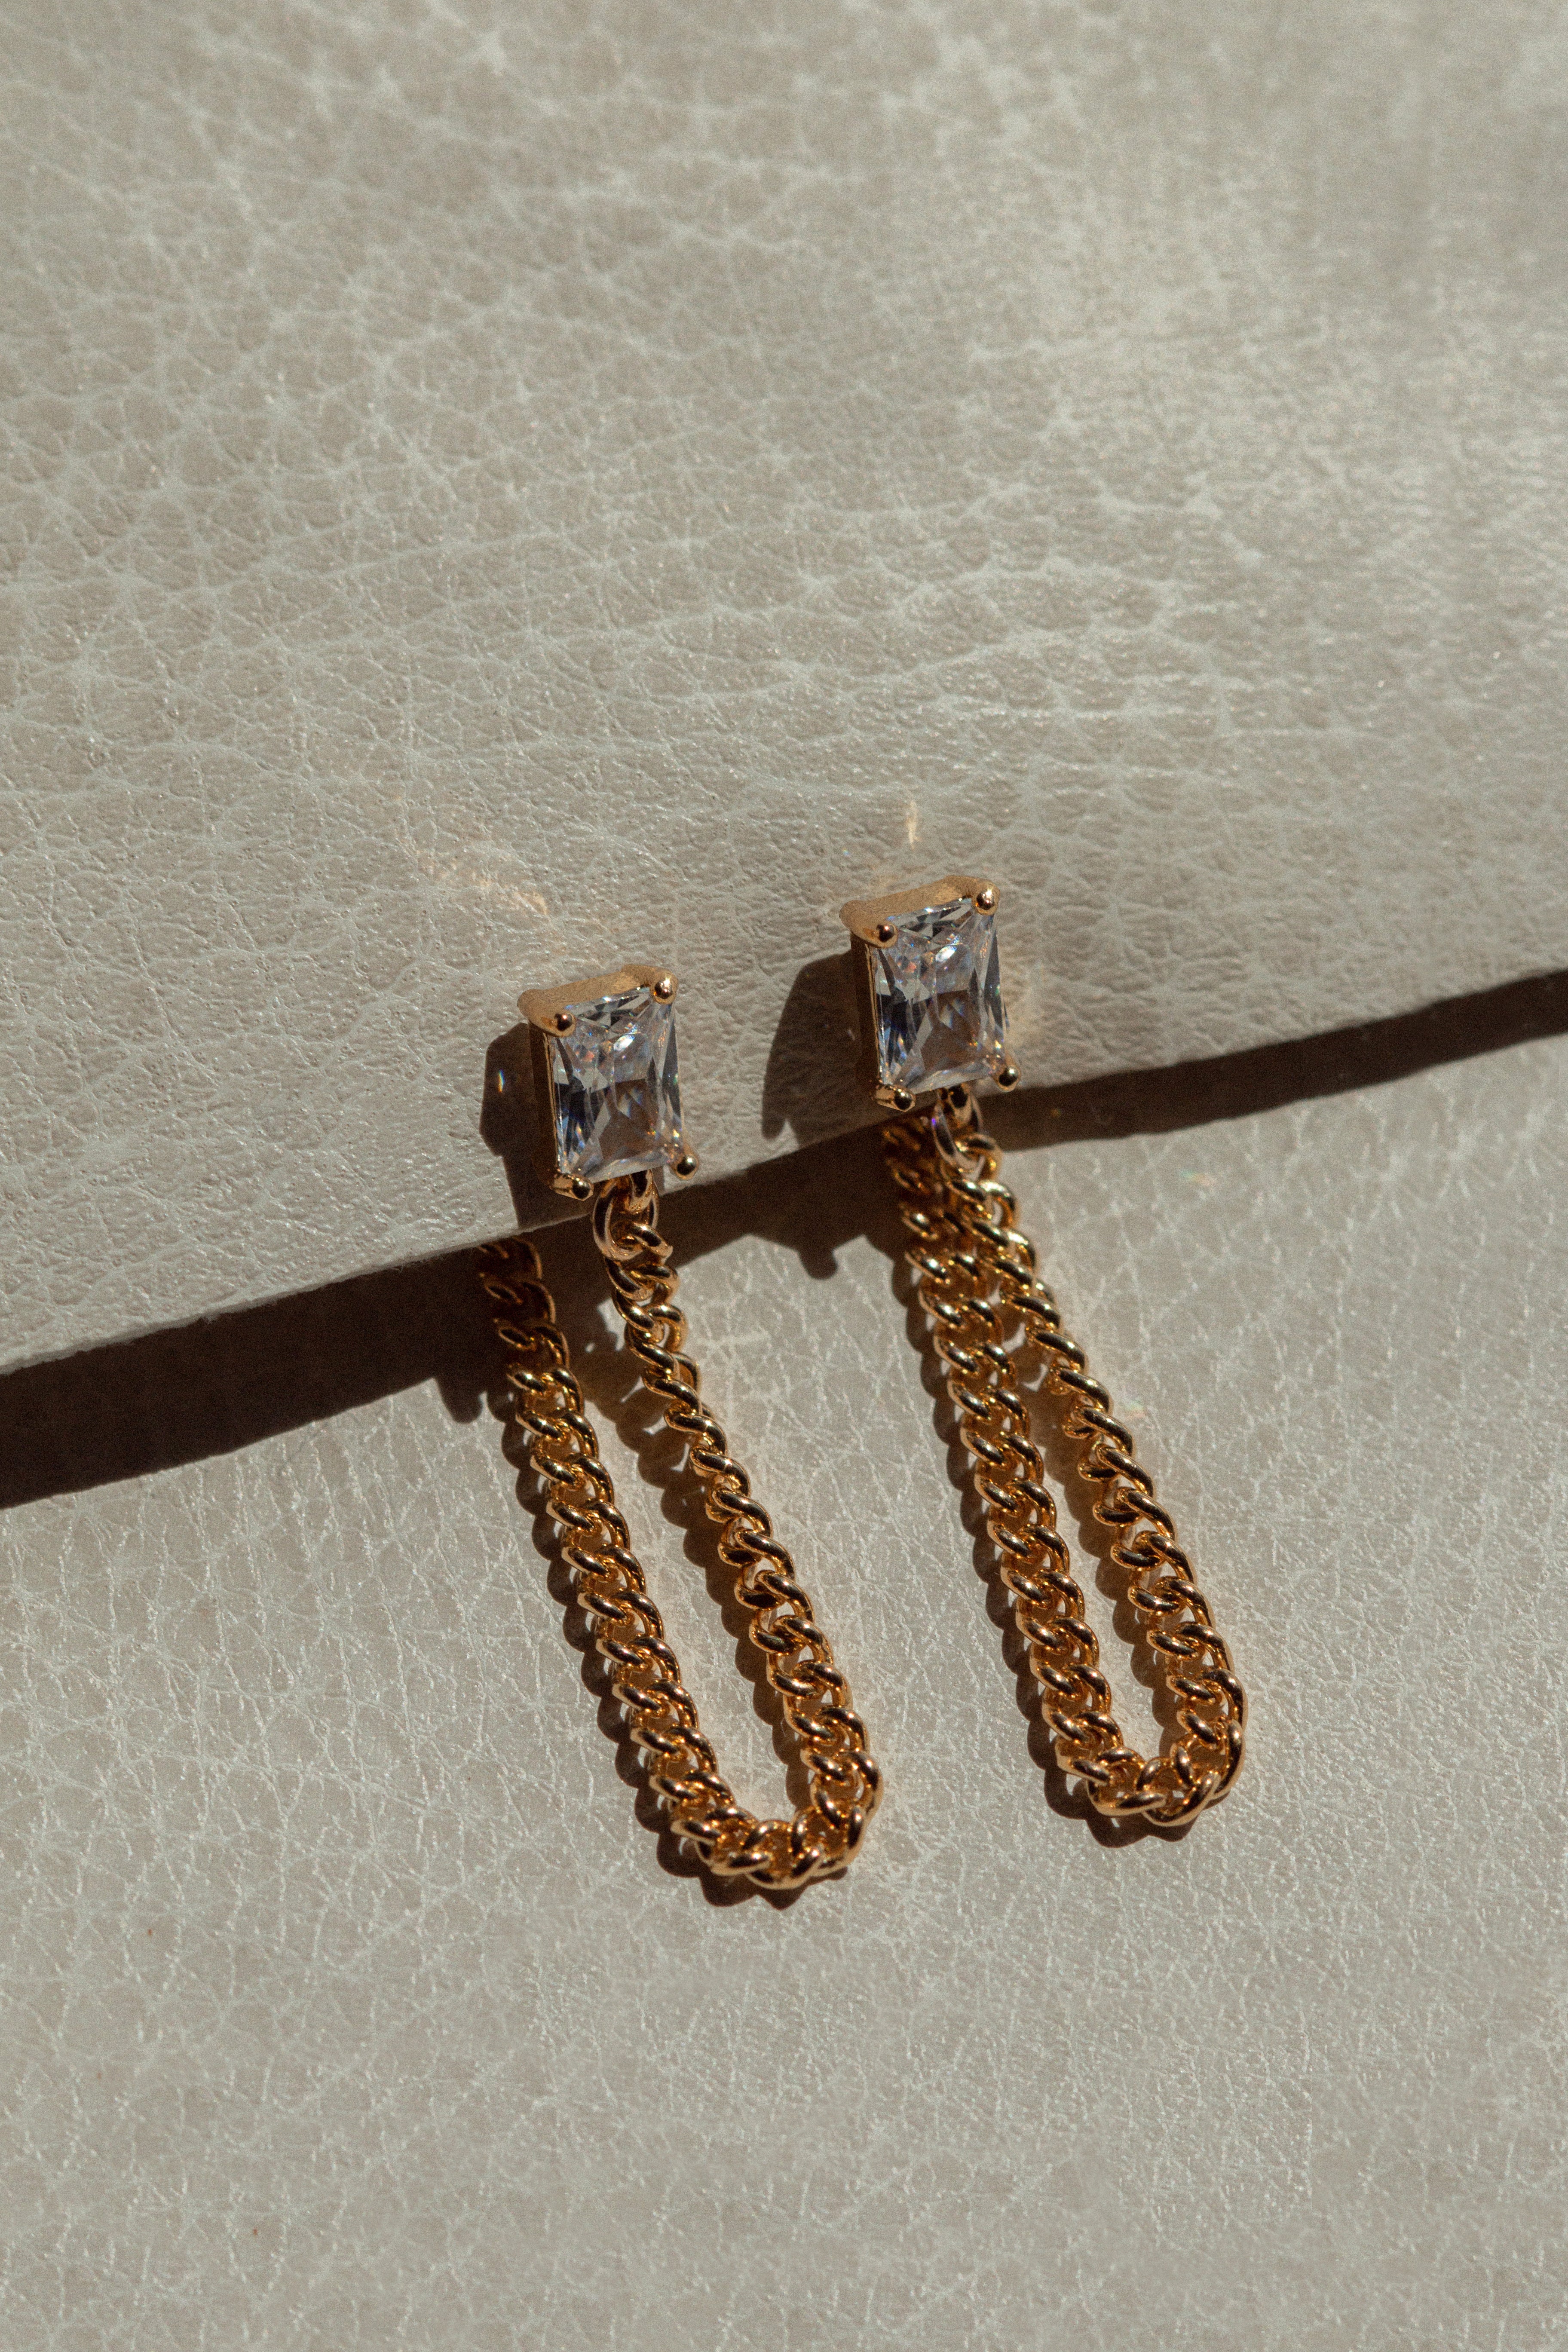 cz earring with chain, stacking earring, statement earring, dainty earring, gold filled earring, connected earring, dainty stud, stud earring, dainty stud, gold stud, gold earring, earrings with chain.